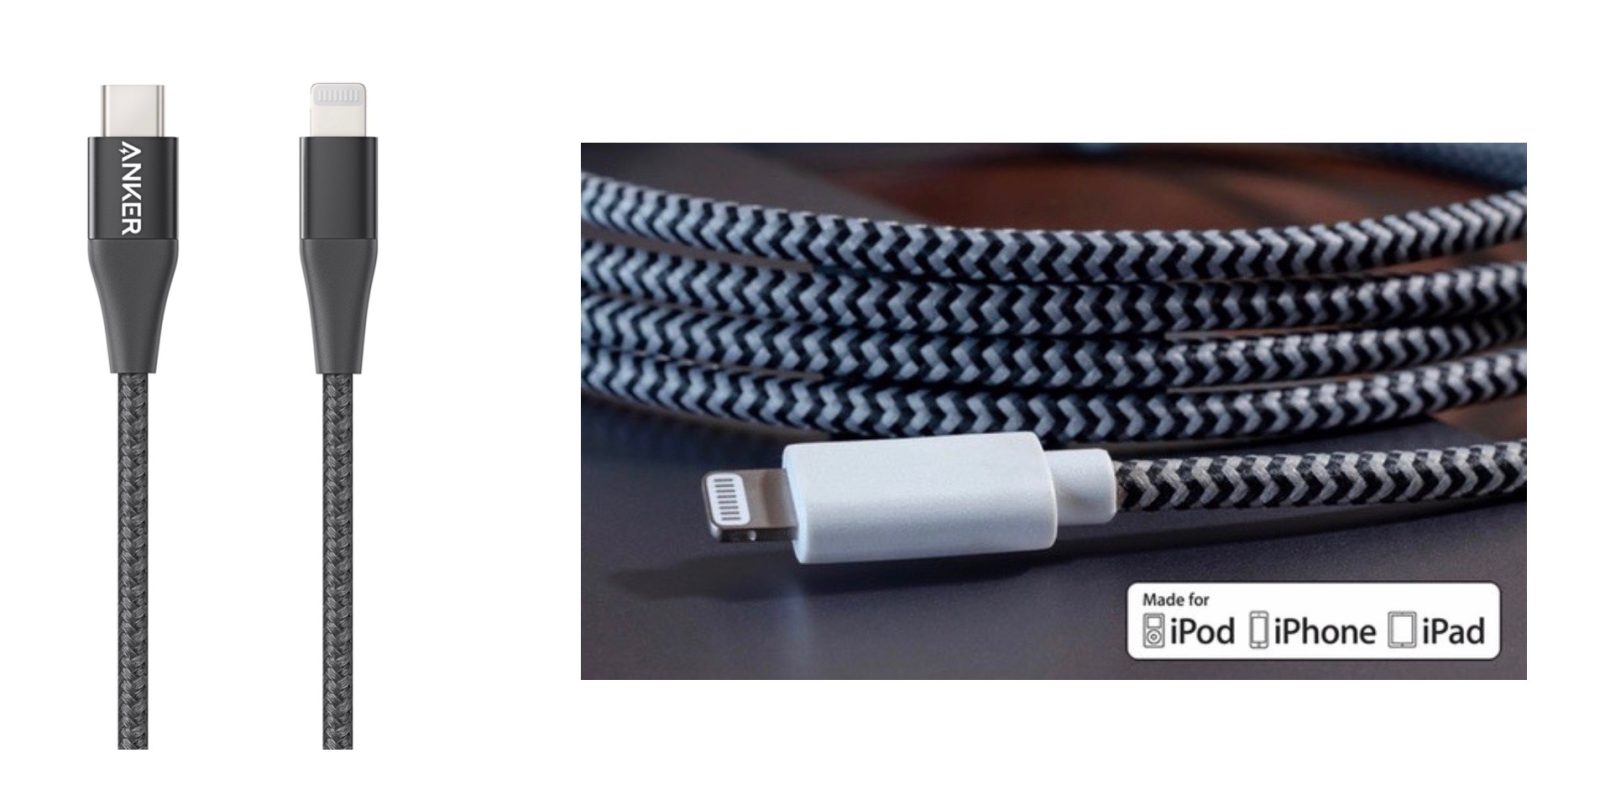 USB C to Lightning Cable [ Apple Mfi Certified] - Anker US